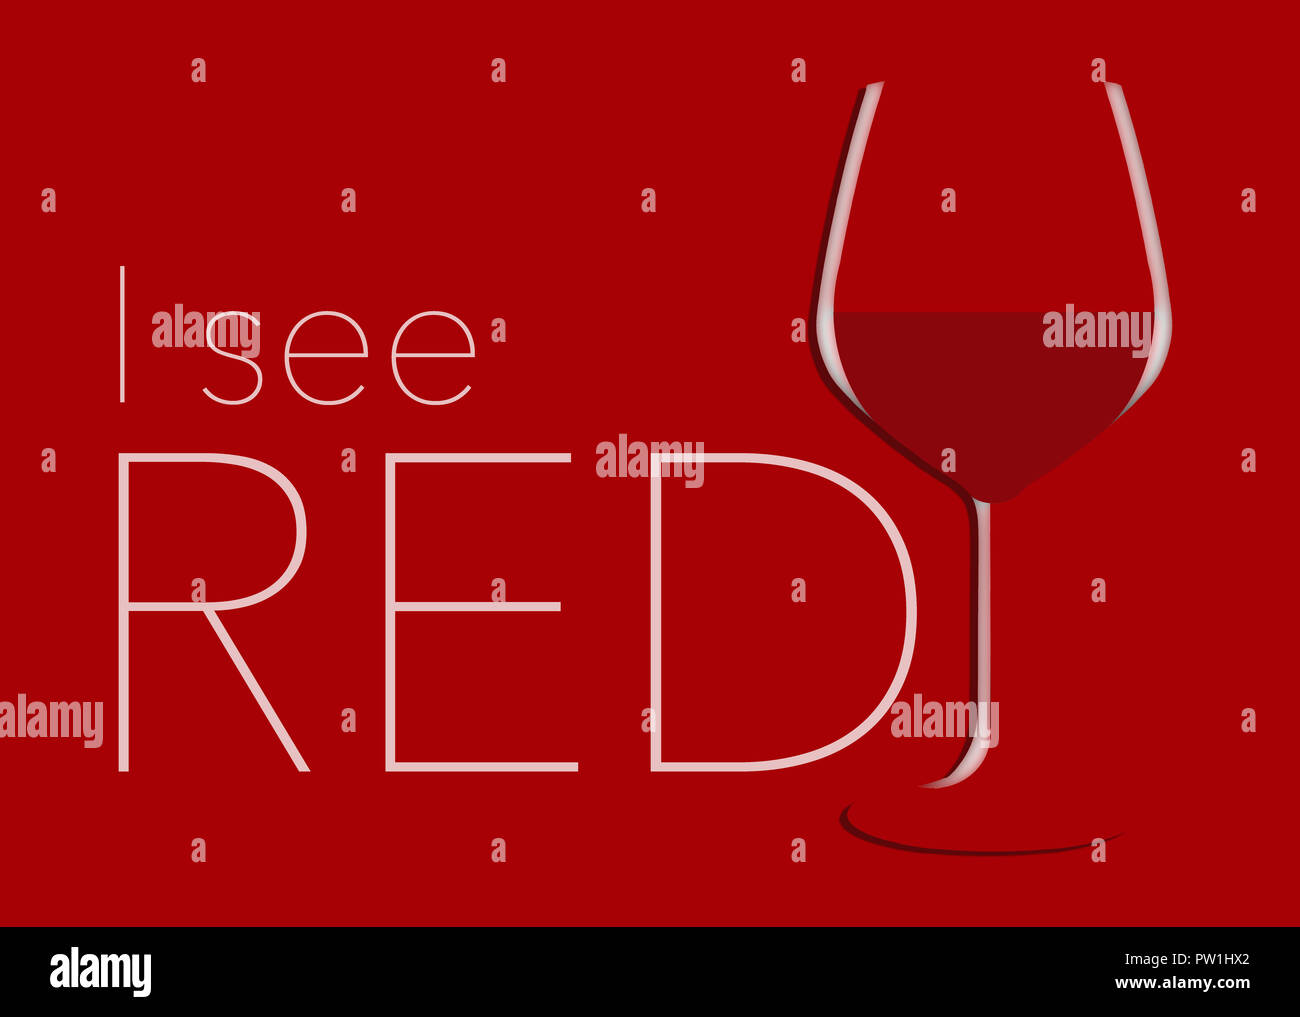 im-seeing-red-here-is-a-glass-of-red-wine-on-a-red-background-with-text-this-is-an-illustration-PW1HX2.jpg